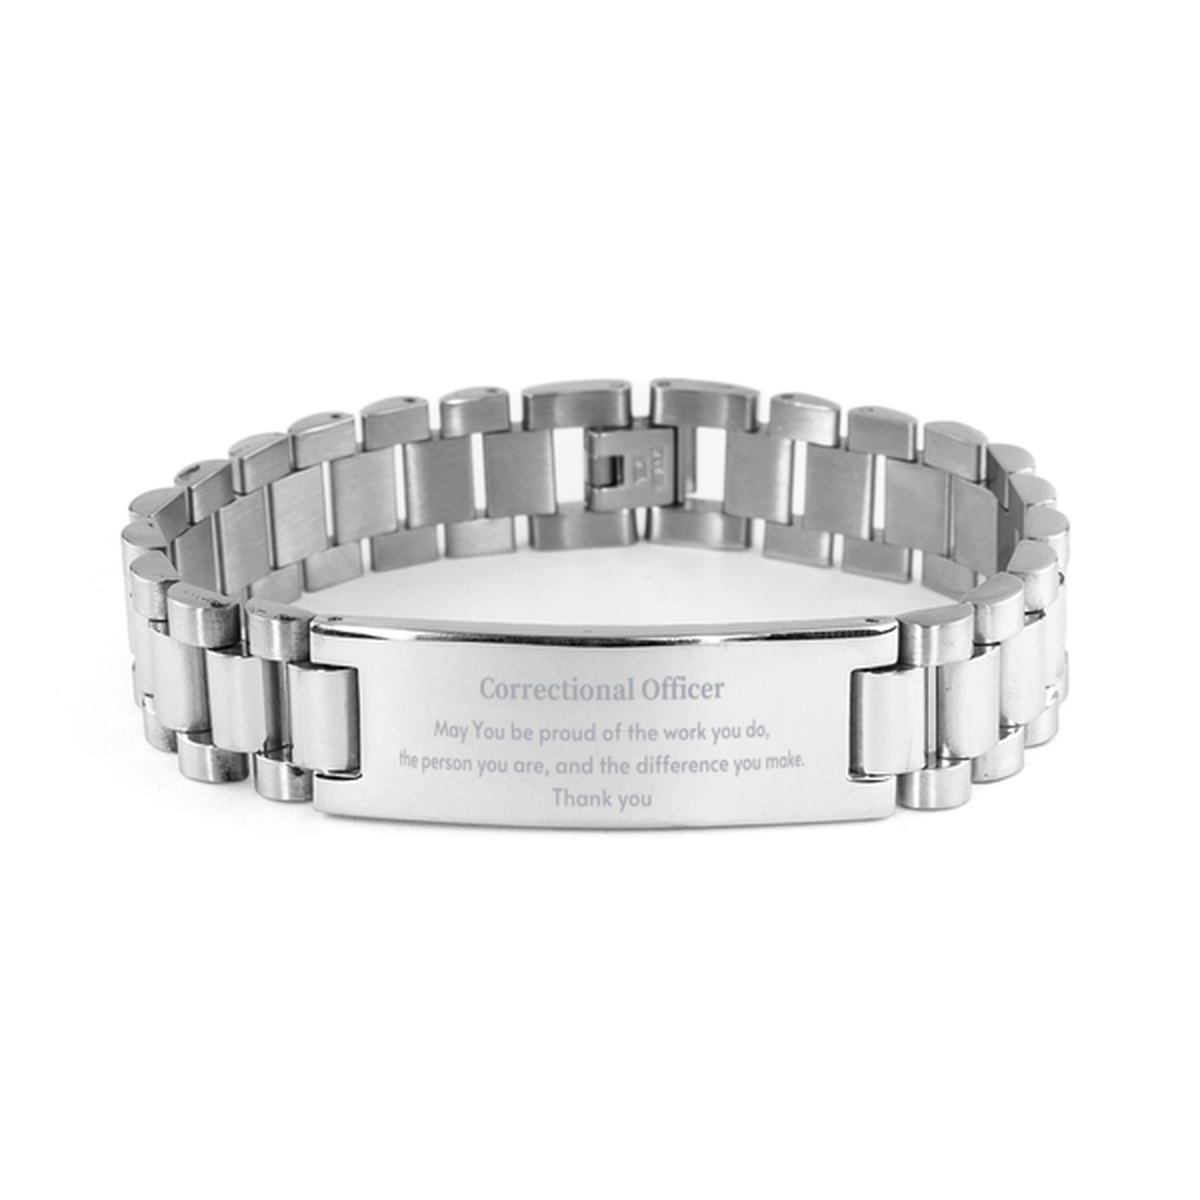 Heartwarming Ladder Stainless Steel Bracelet Retirement Coworkers Gifts for Correctional Officer, Correctional Officer May You be proud of the work you do, the person you are Gifts for Boss Men Women Friends